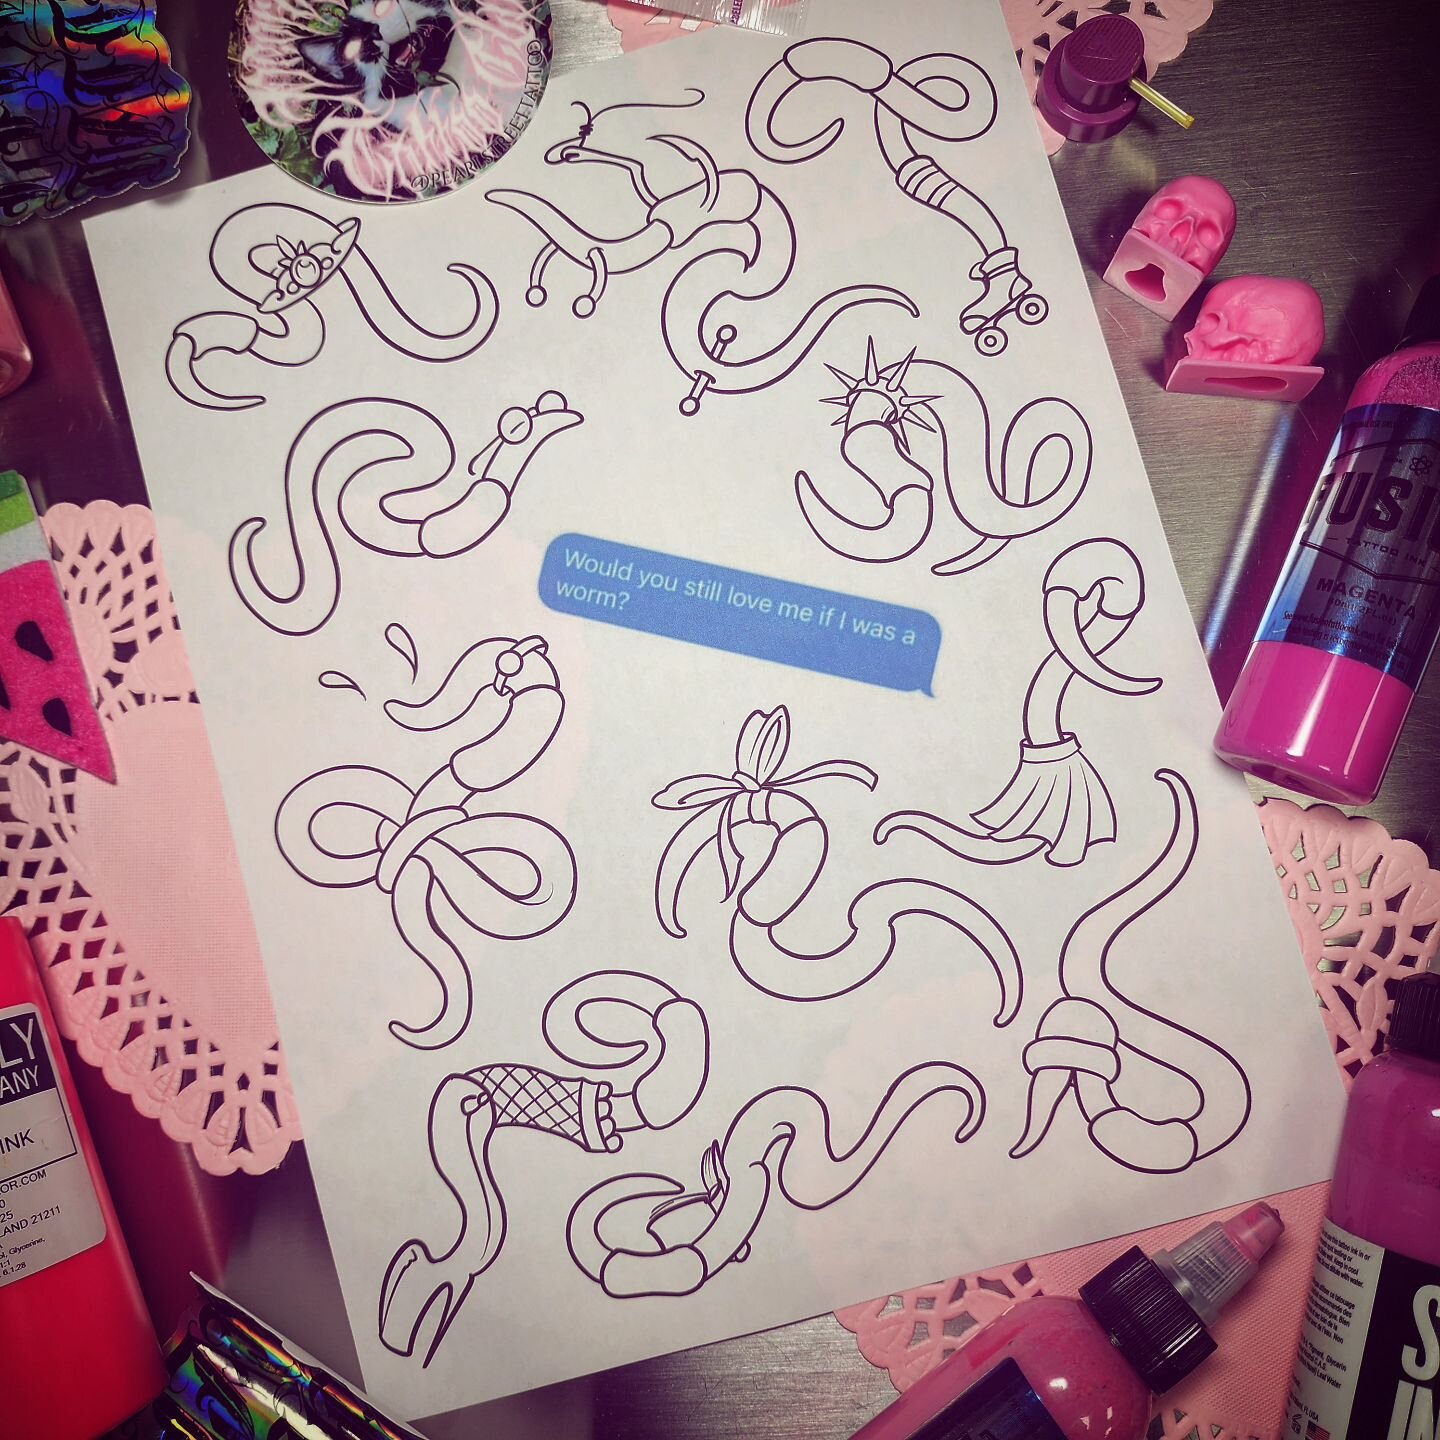 Would you still love me if I was a worm?

Valentines flash sheet #2 
I started painting this but got distracted (probably by the Internet tbf) so here's some linework! 
I'm fully booked for our flash day but I'm down to tattoo anything from either va